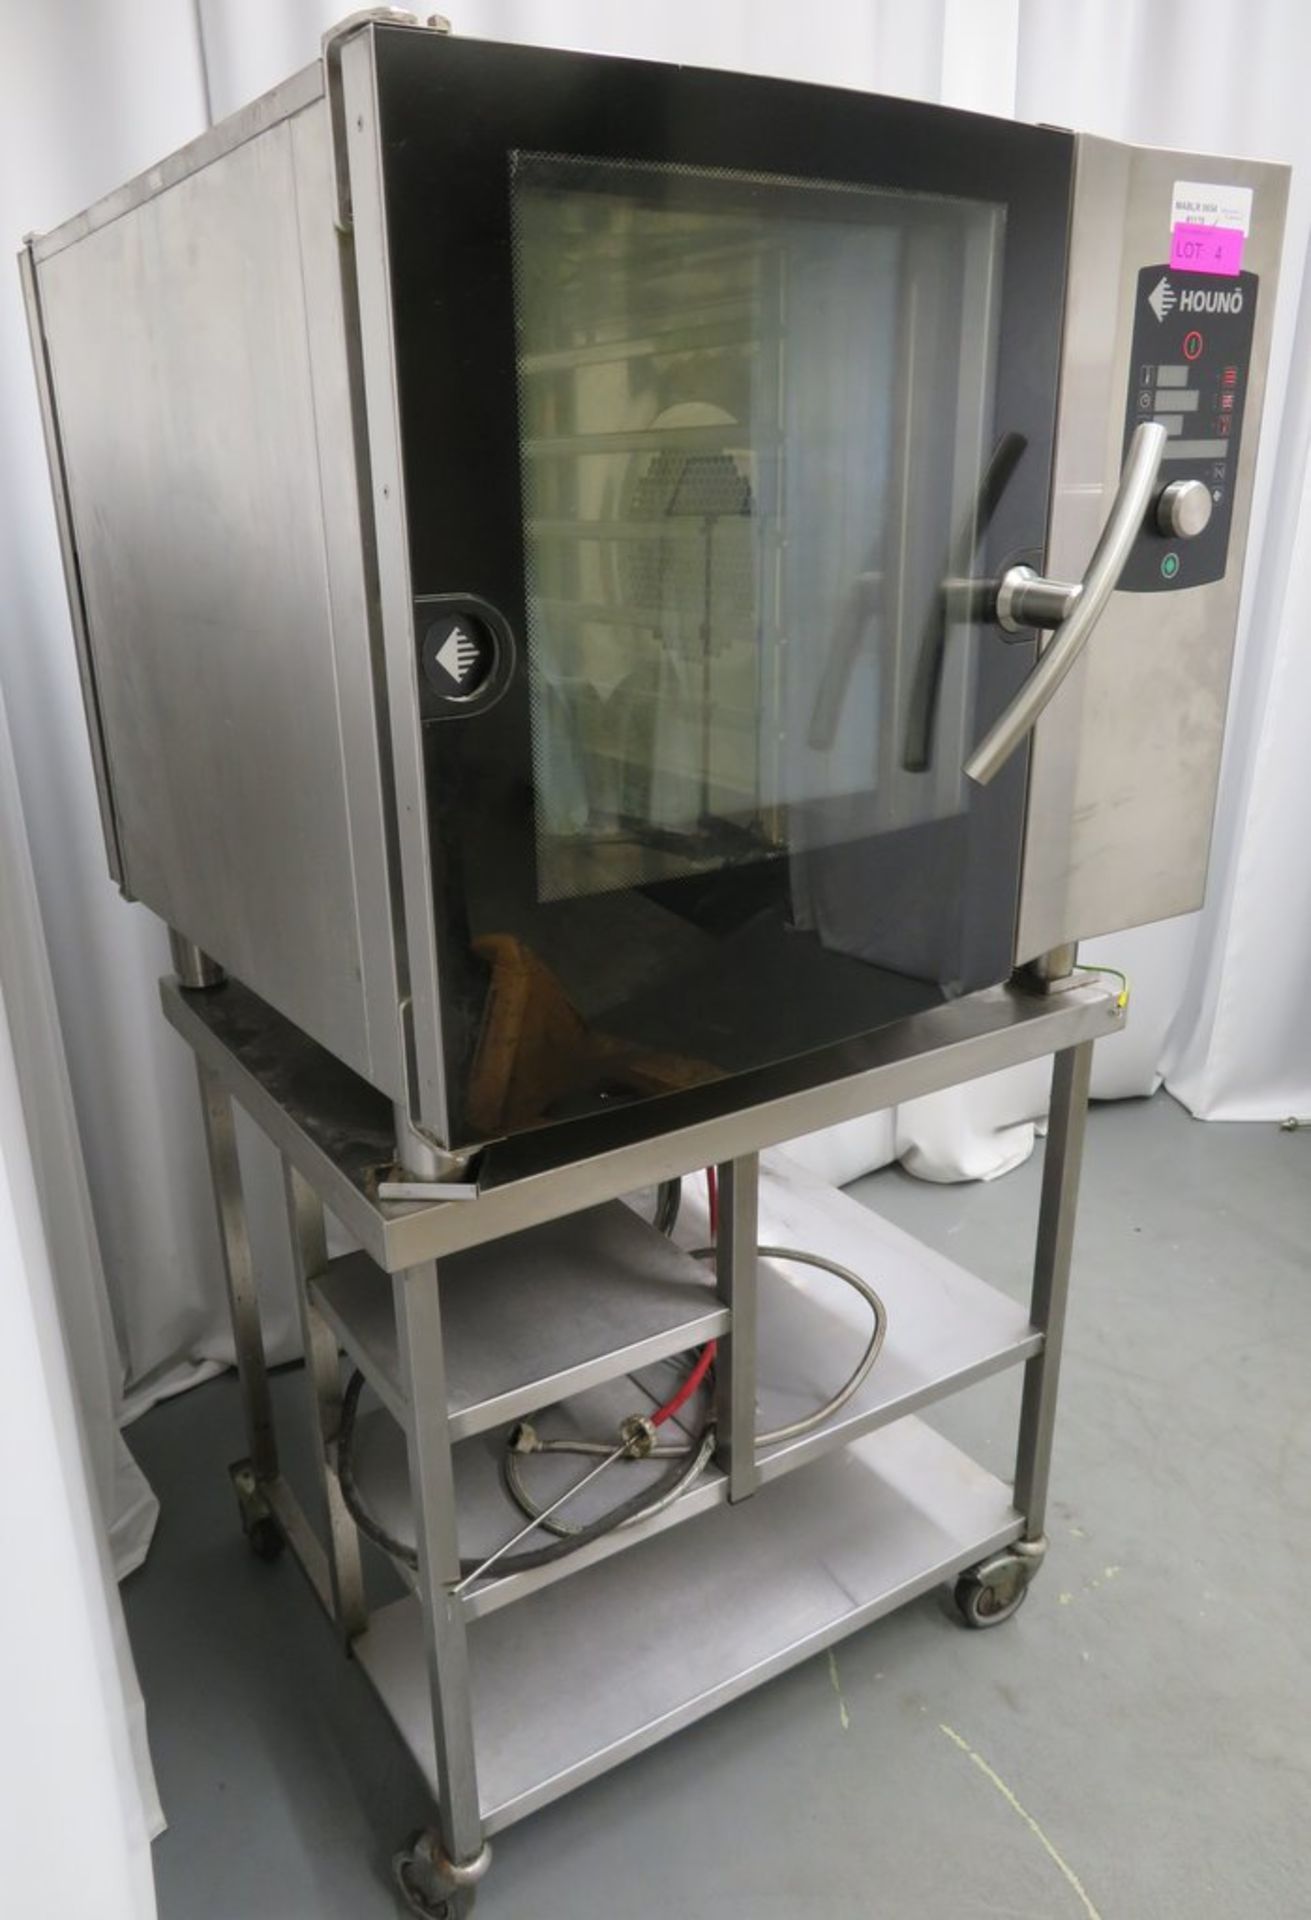 Houno B5 5 grid combi oven, 3 phase electric, dual opening front and back - Image 2 of 9